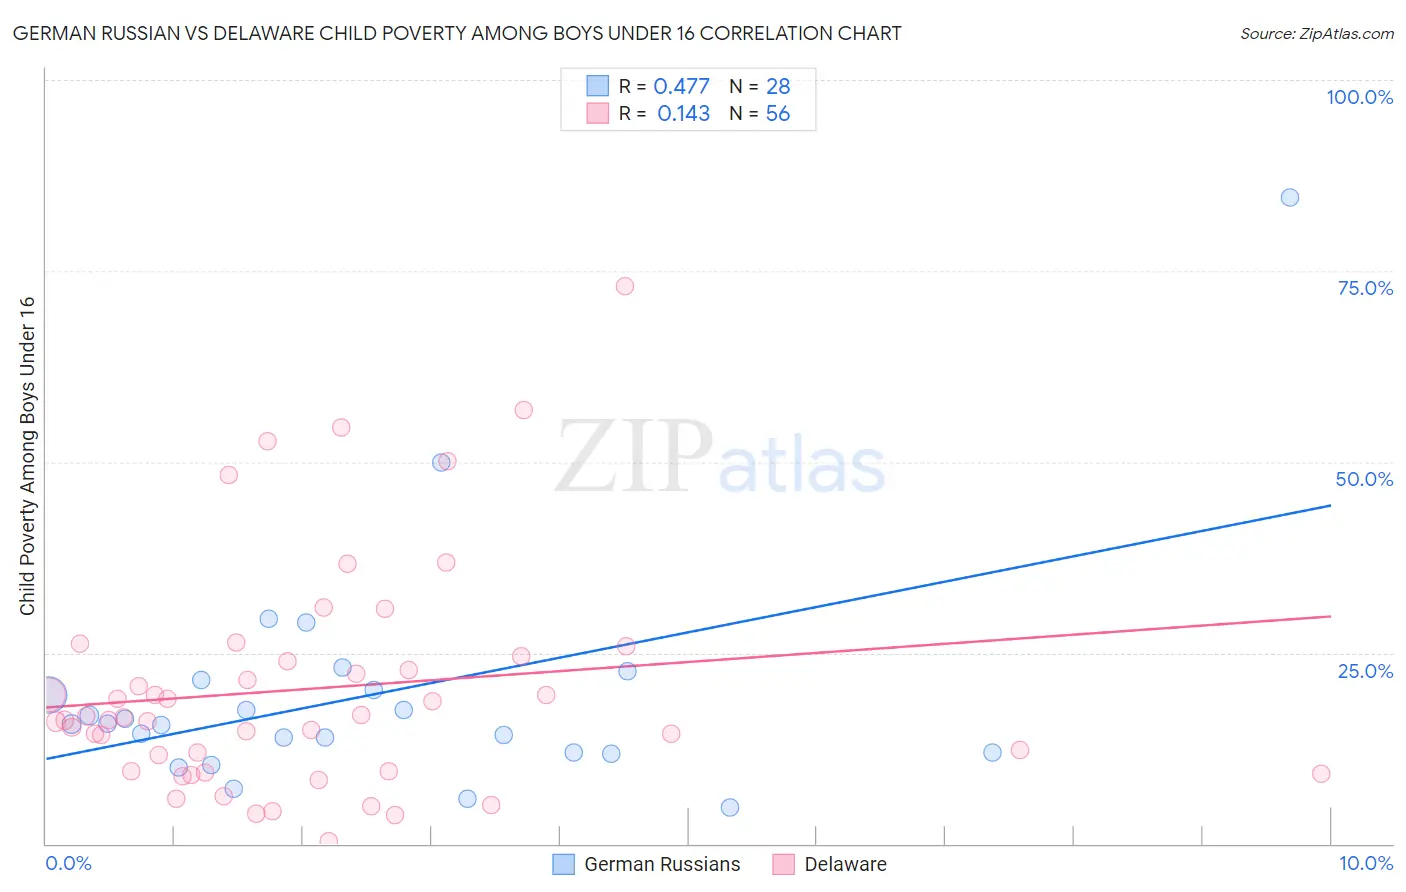 German Russian vs Delaware Child Poverty Among Boys Under 16